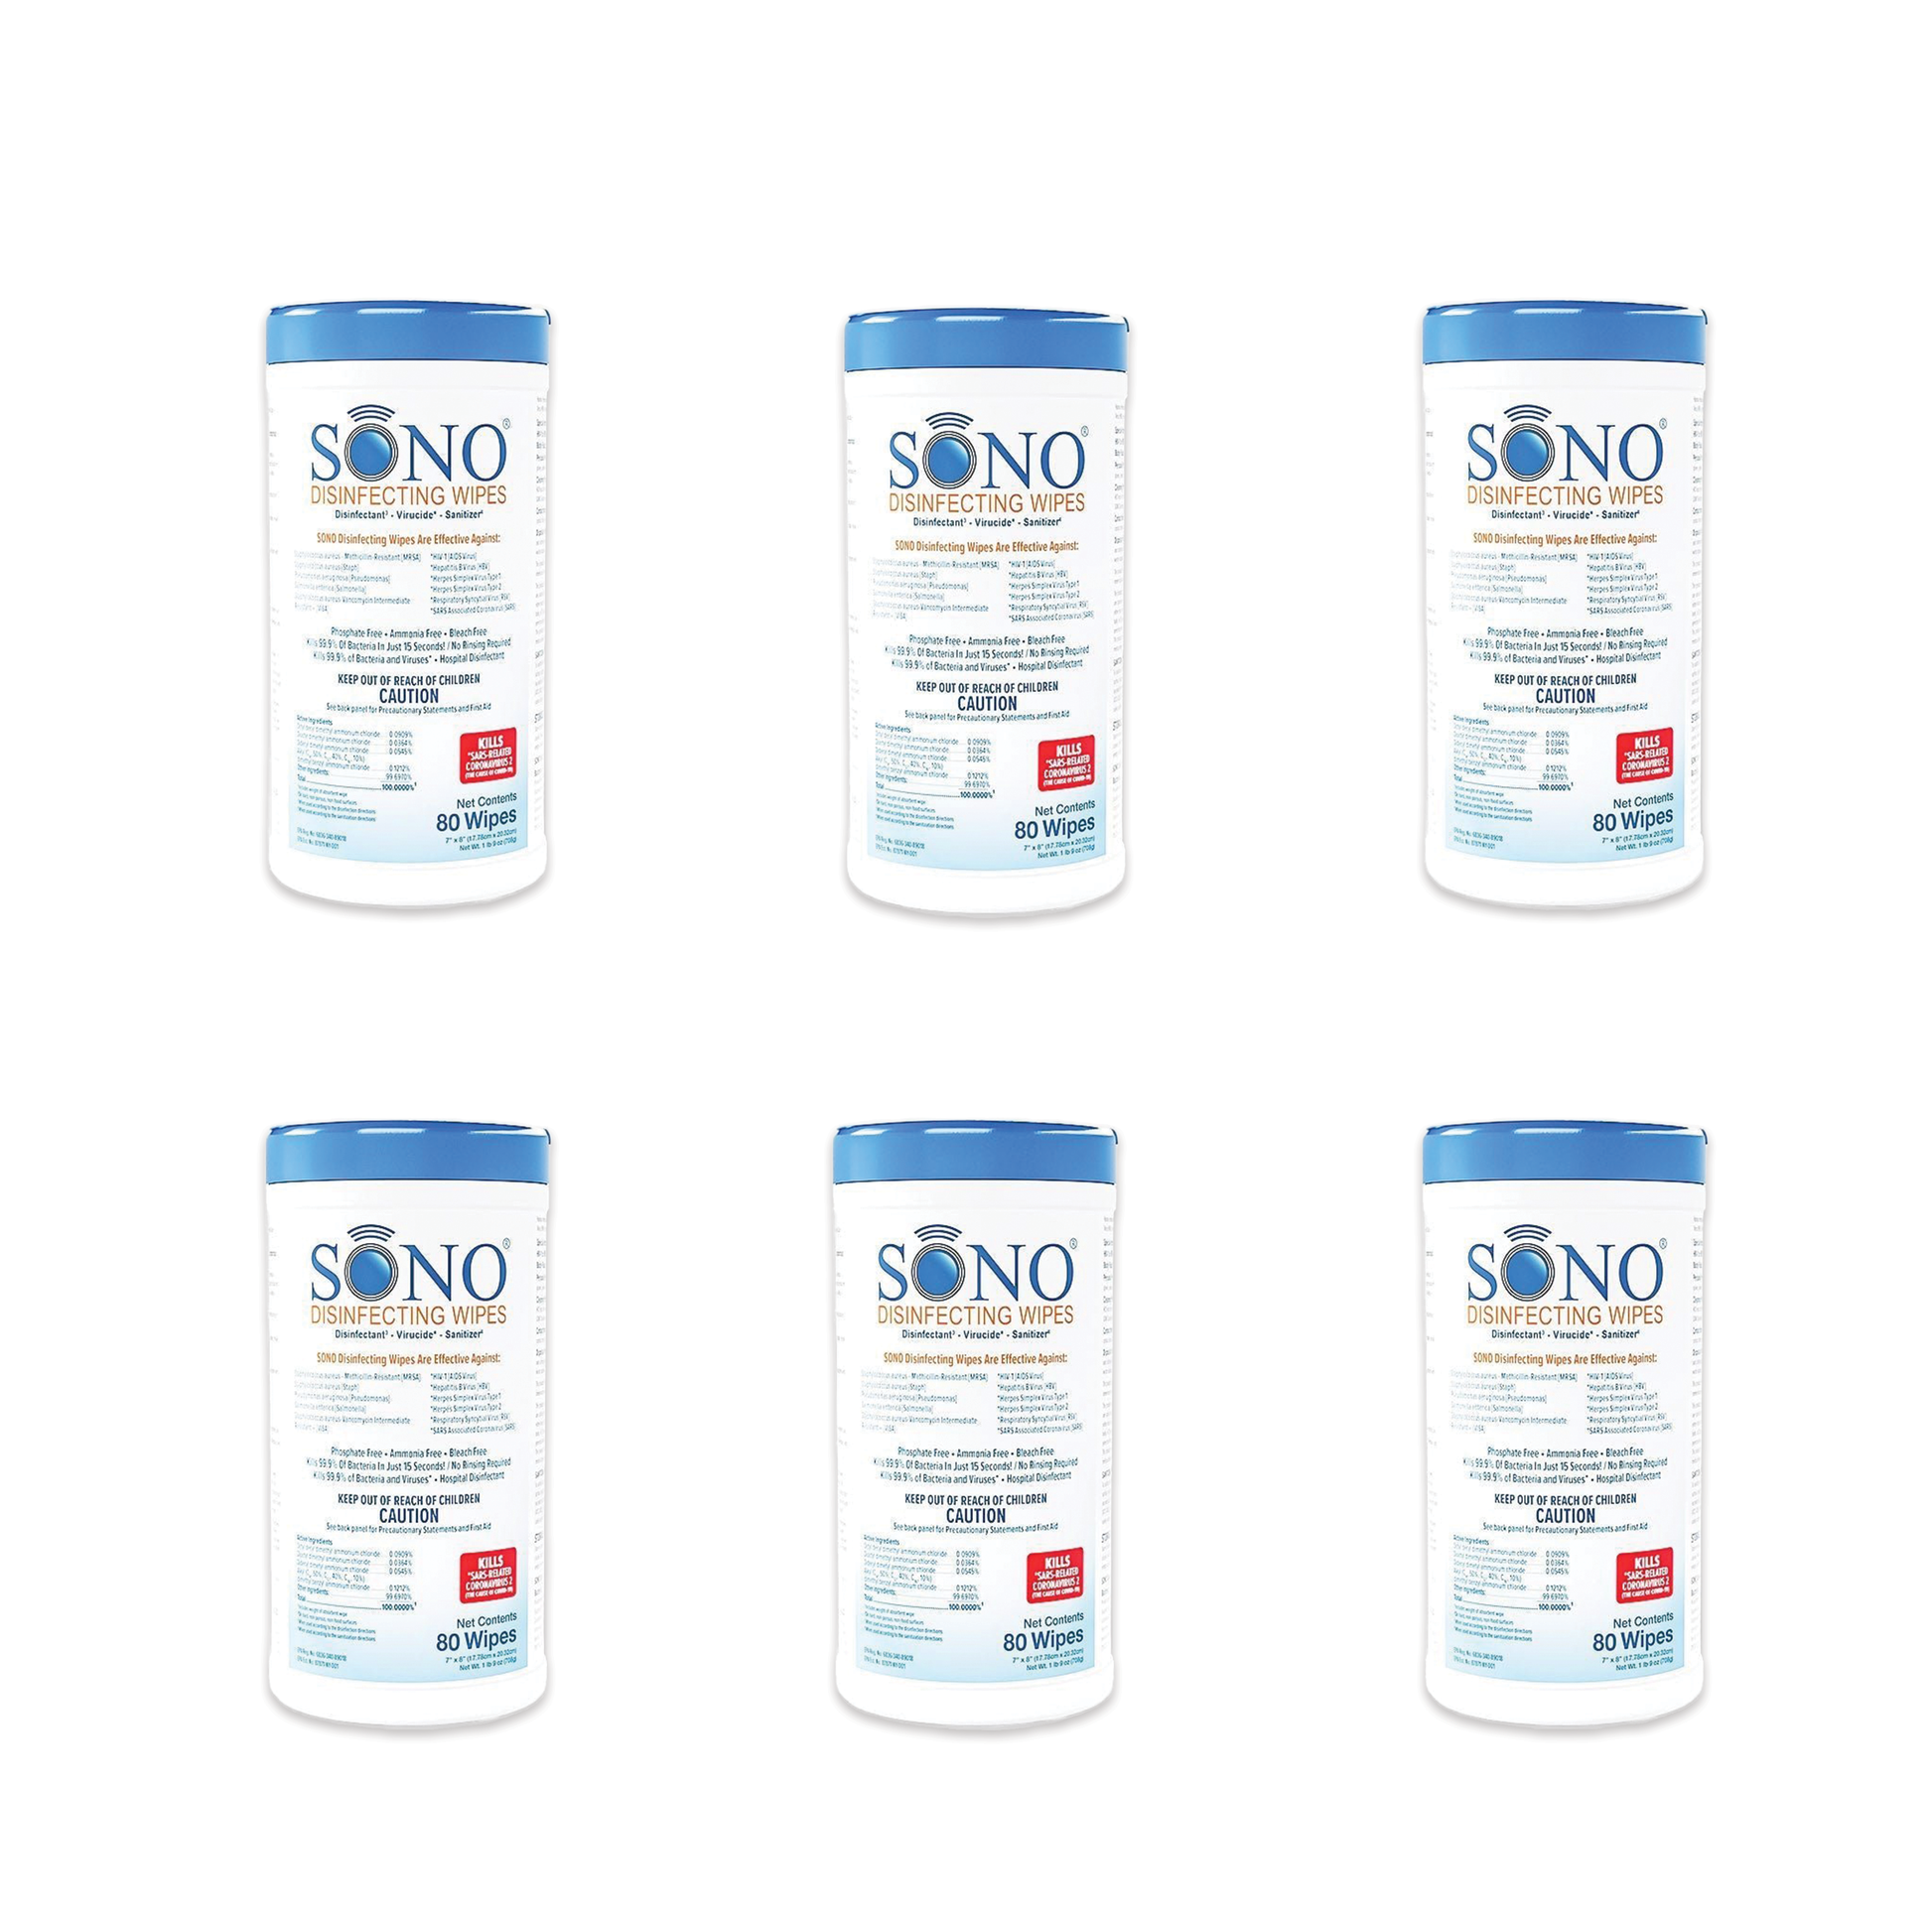 SONO Disinfecting Wipes Canister (6 PACK) - Bulk Cleaning Solution by SONO Wipes